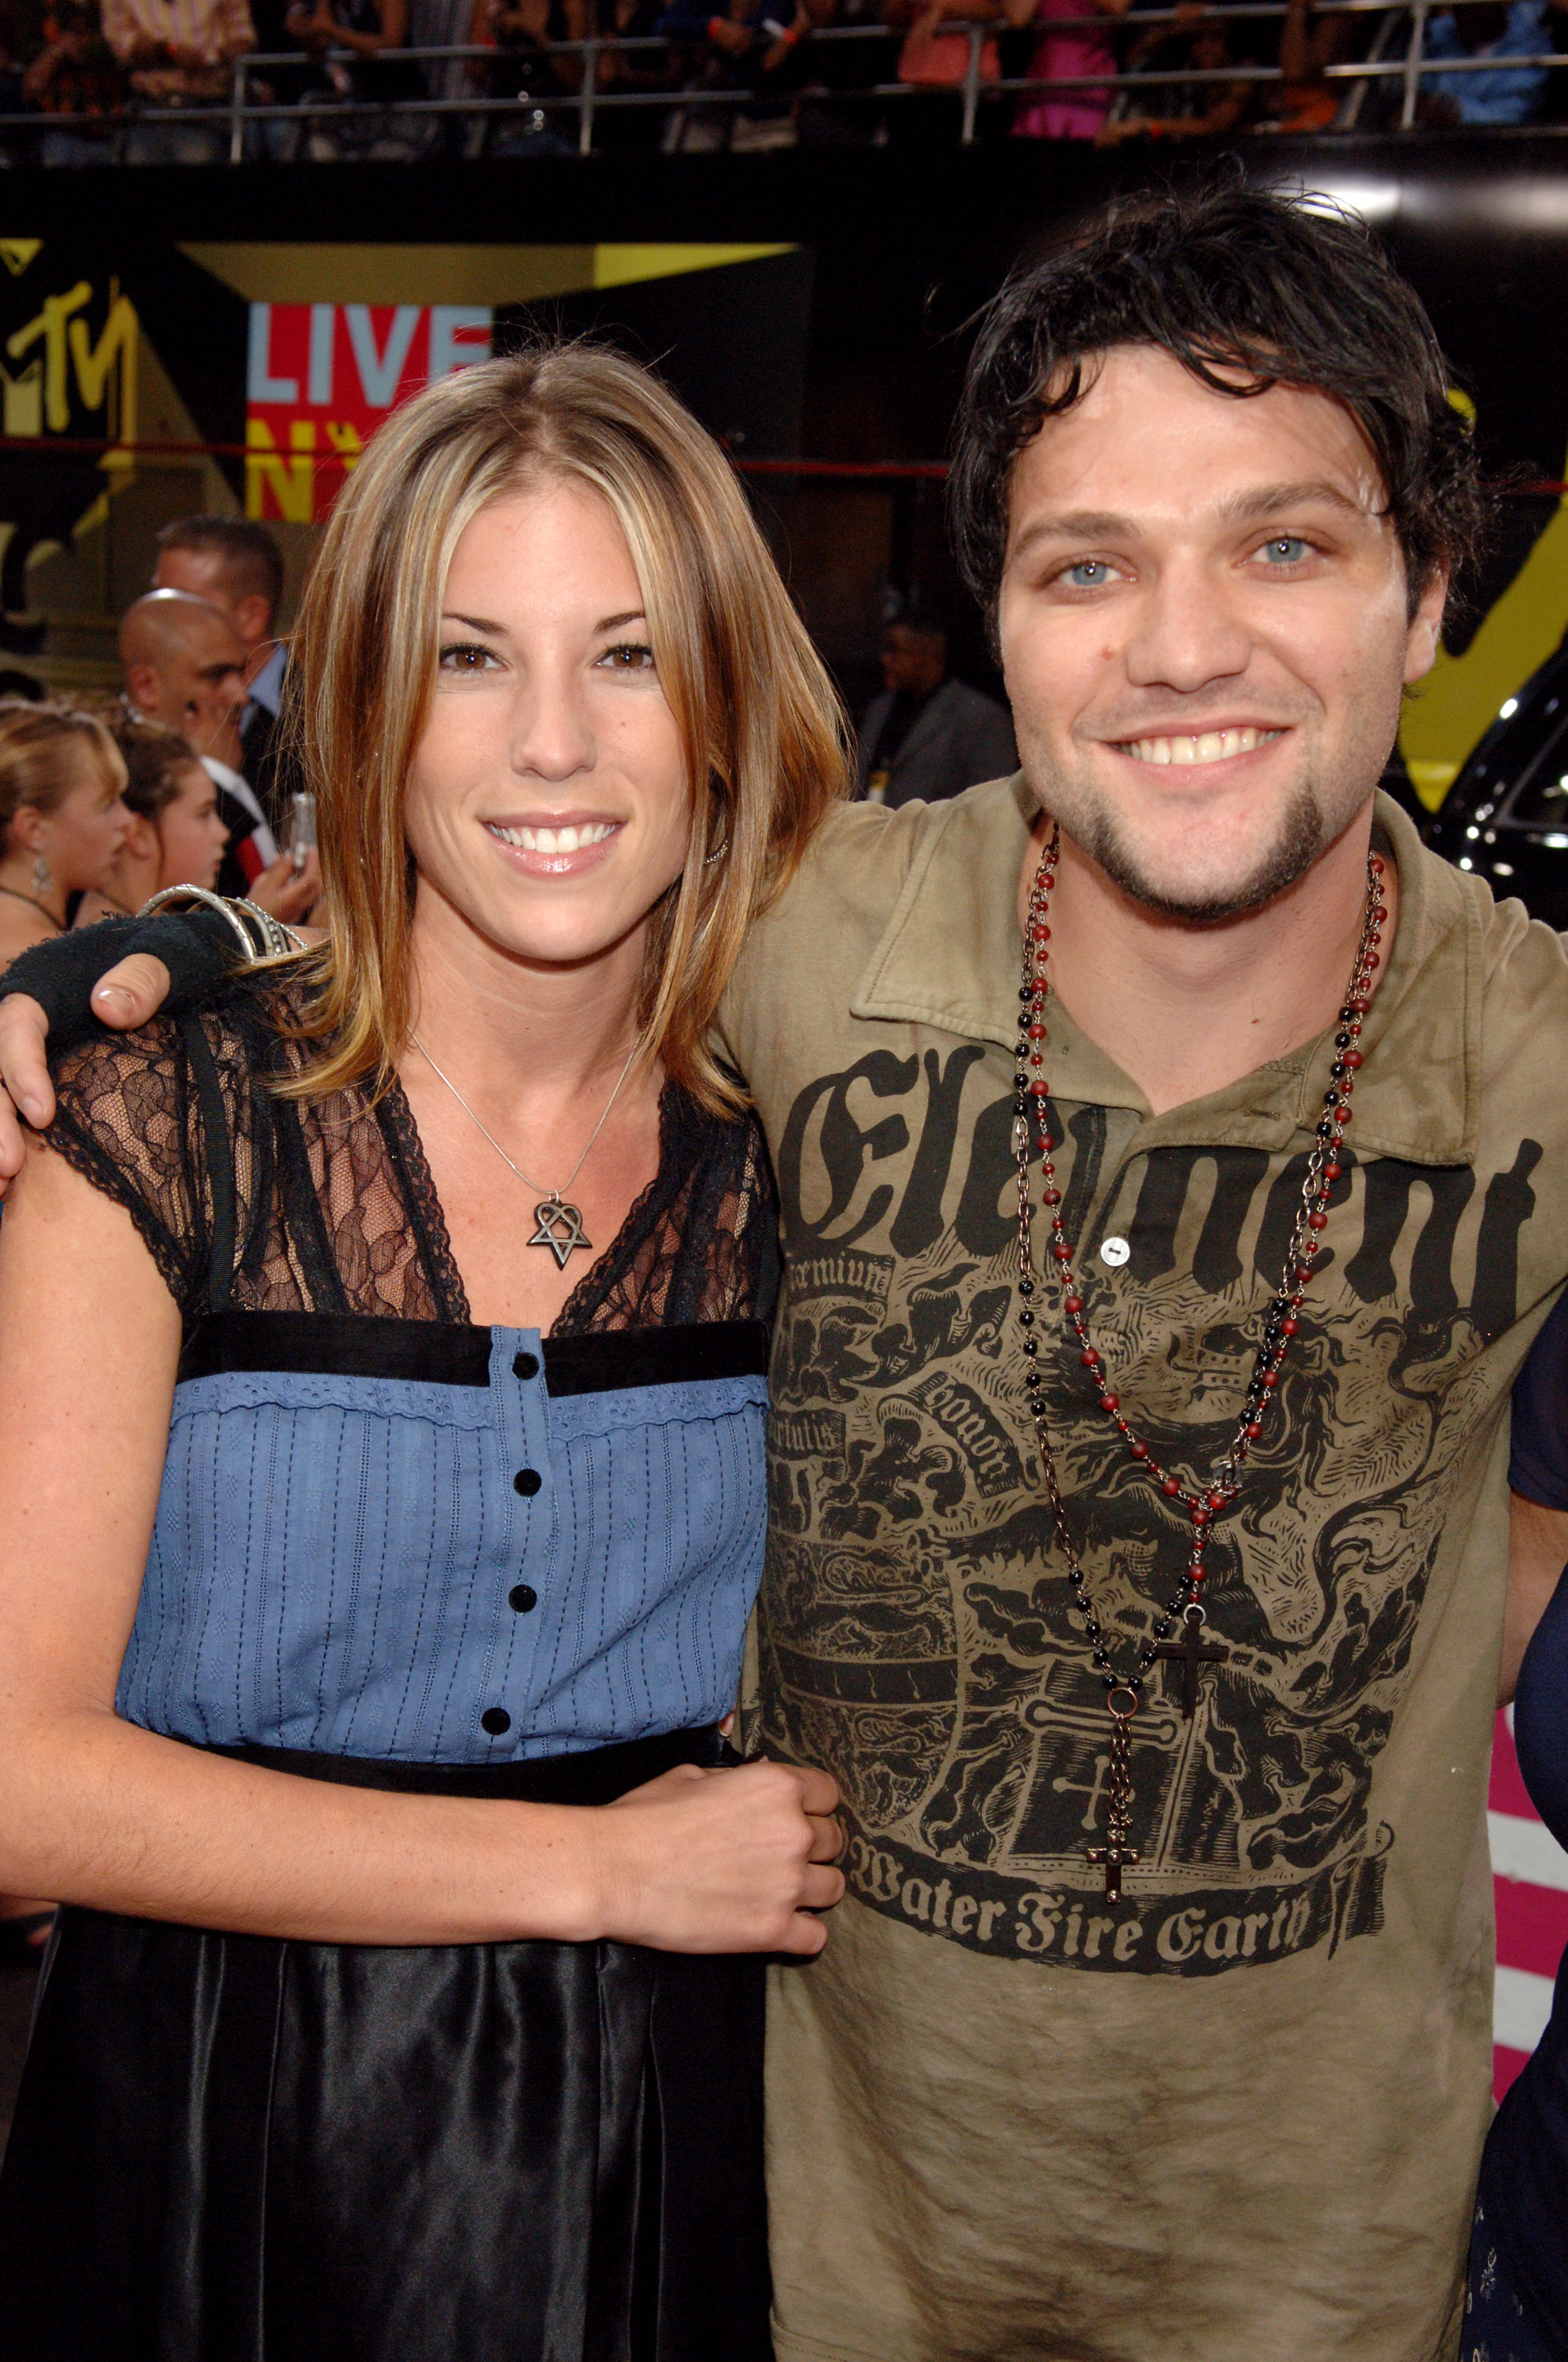 Missy Rothstein and Bam Margera during 2006 MTV Video Music Awards - Red Carpet at Radio City Music Hall in New York City, New York on August 31, 2006 | Source: Getty Images